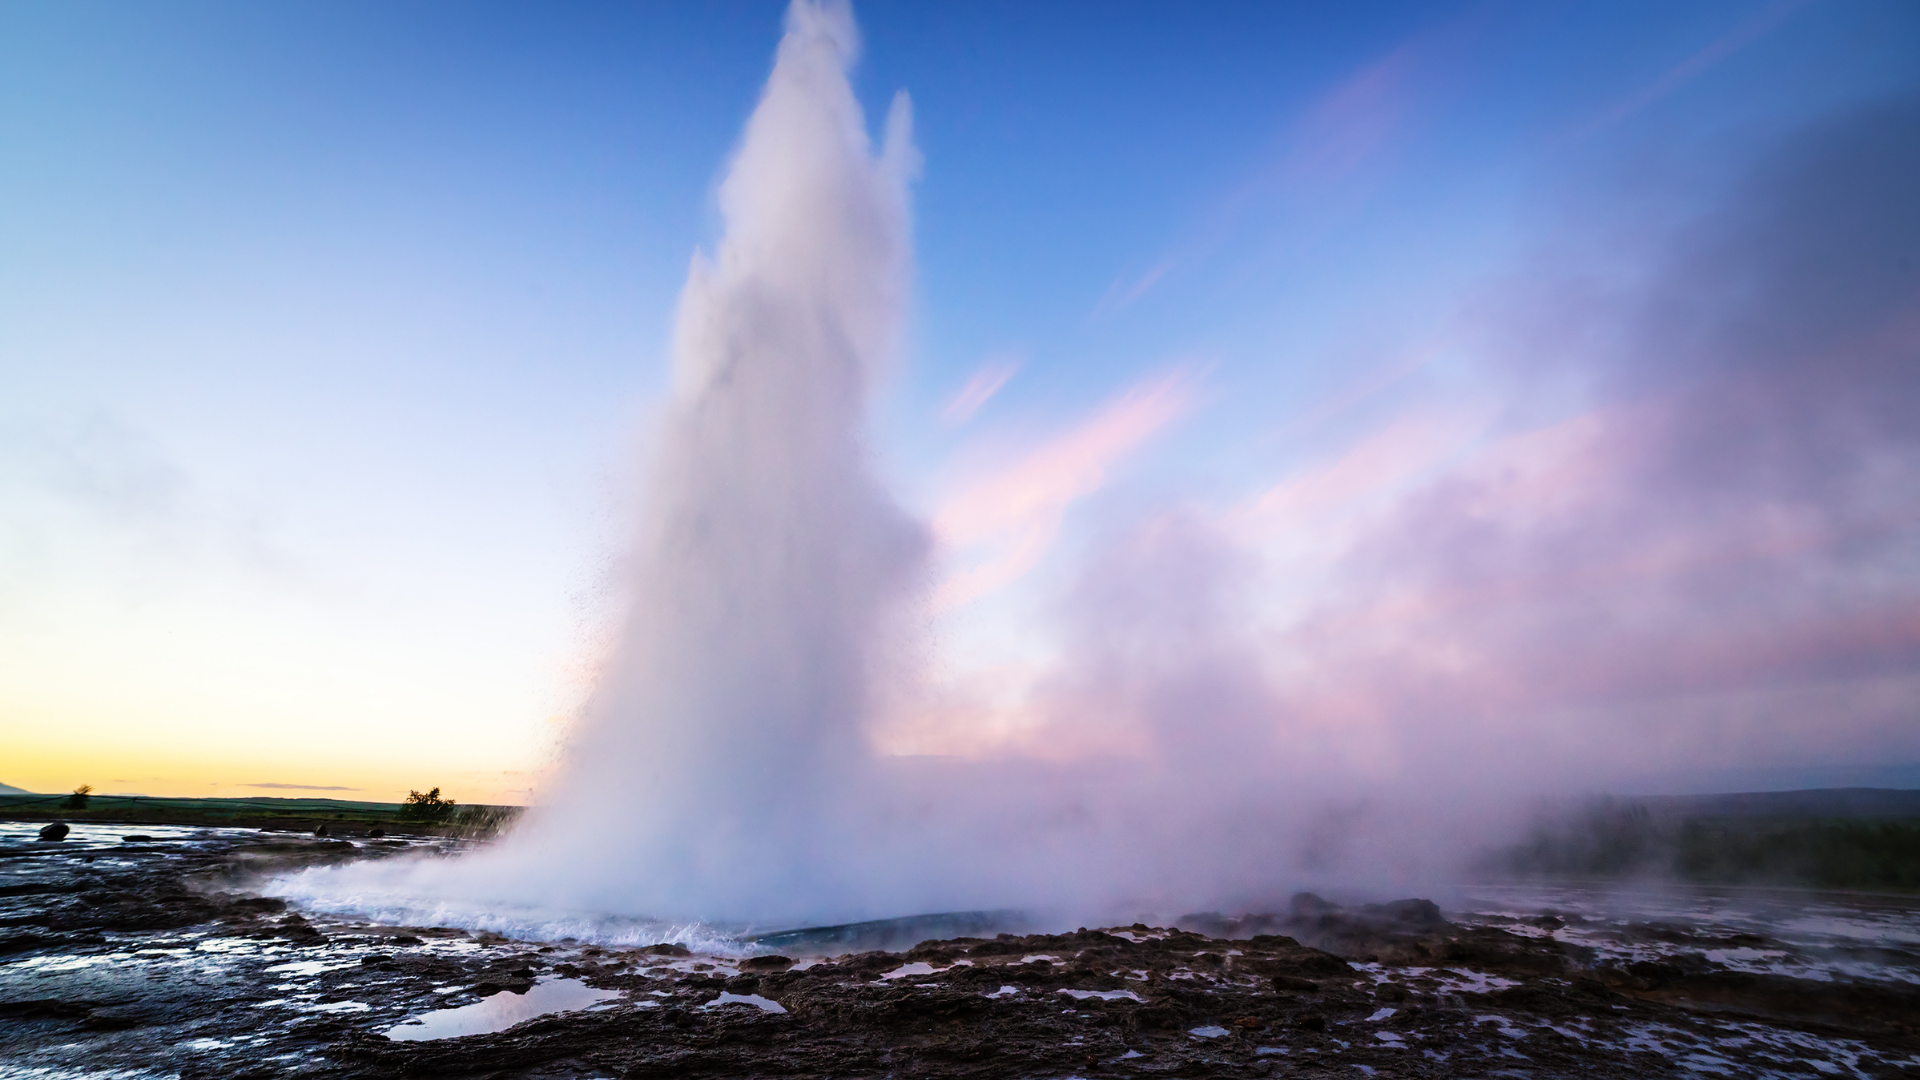 Geysir or Geyser is a part of the Golden Circle, must see in Iceland